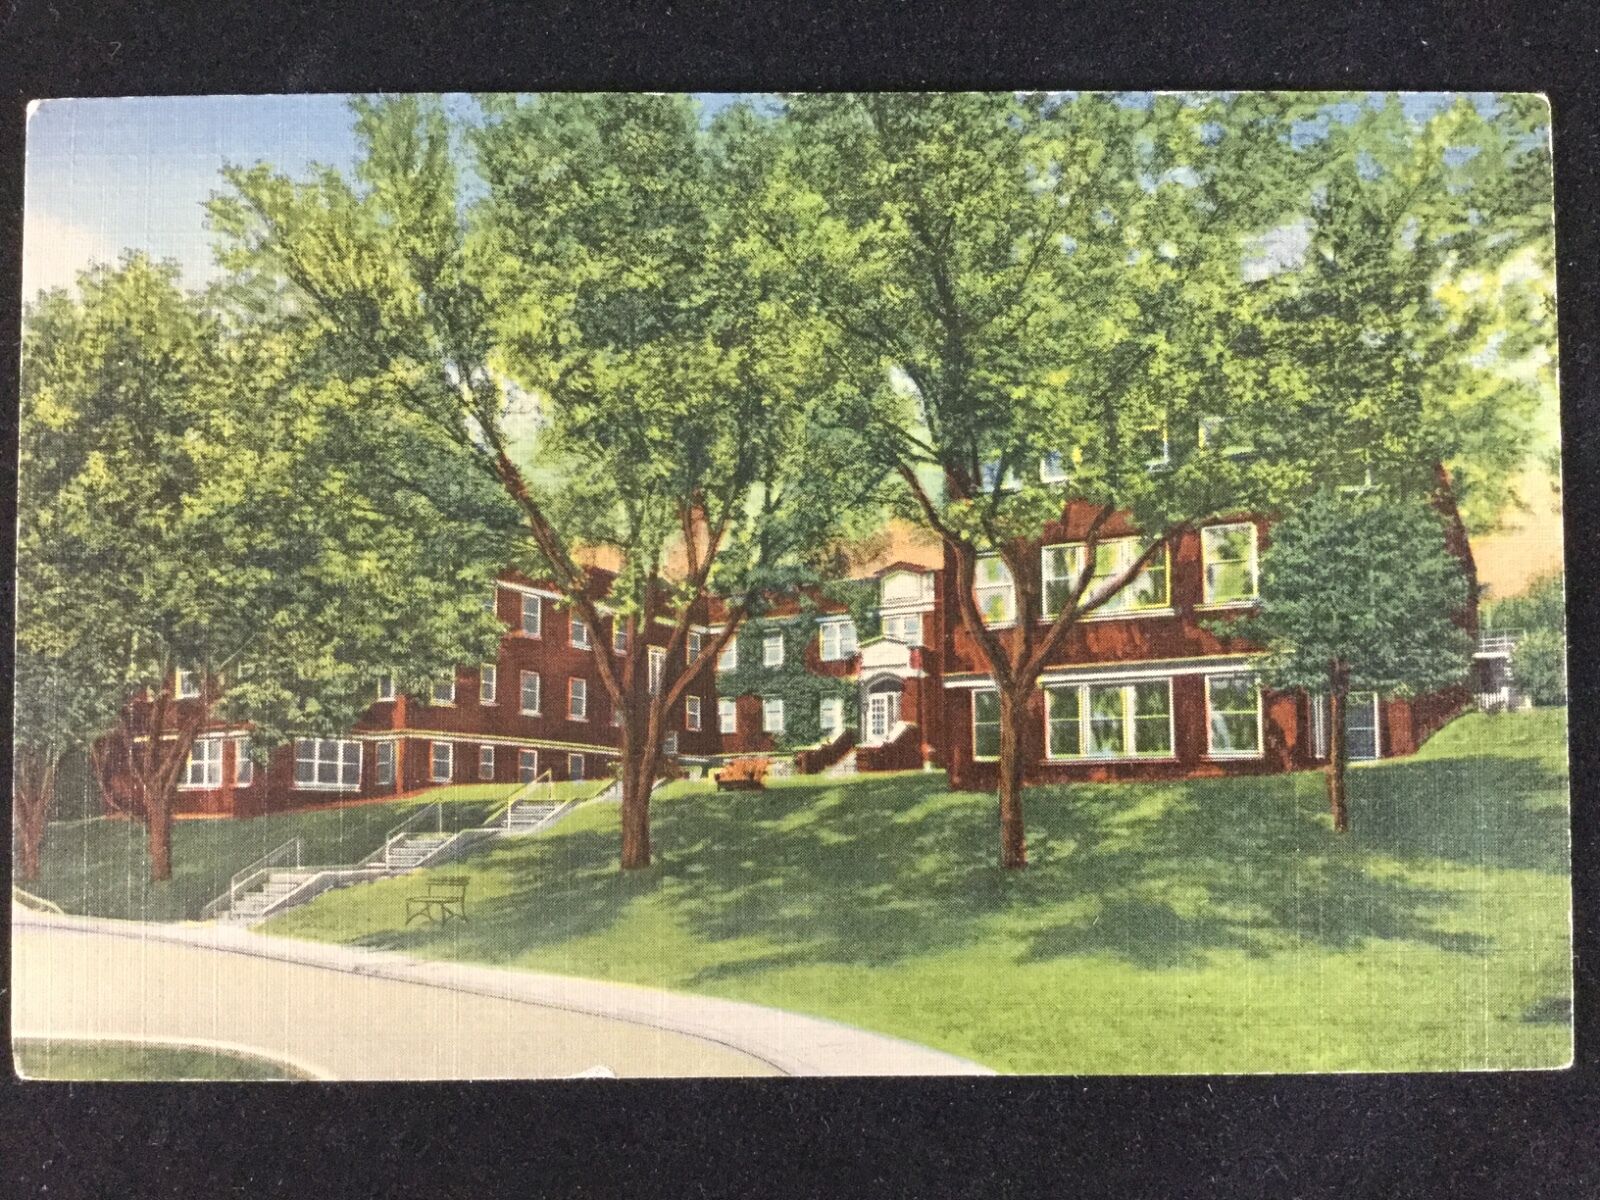 Immanuel Deaconess Home for the Aged, Omaha, NE Postcard